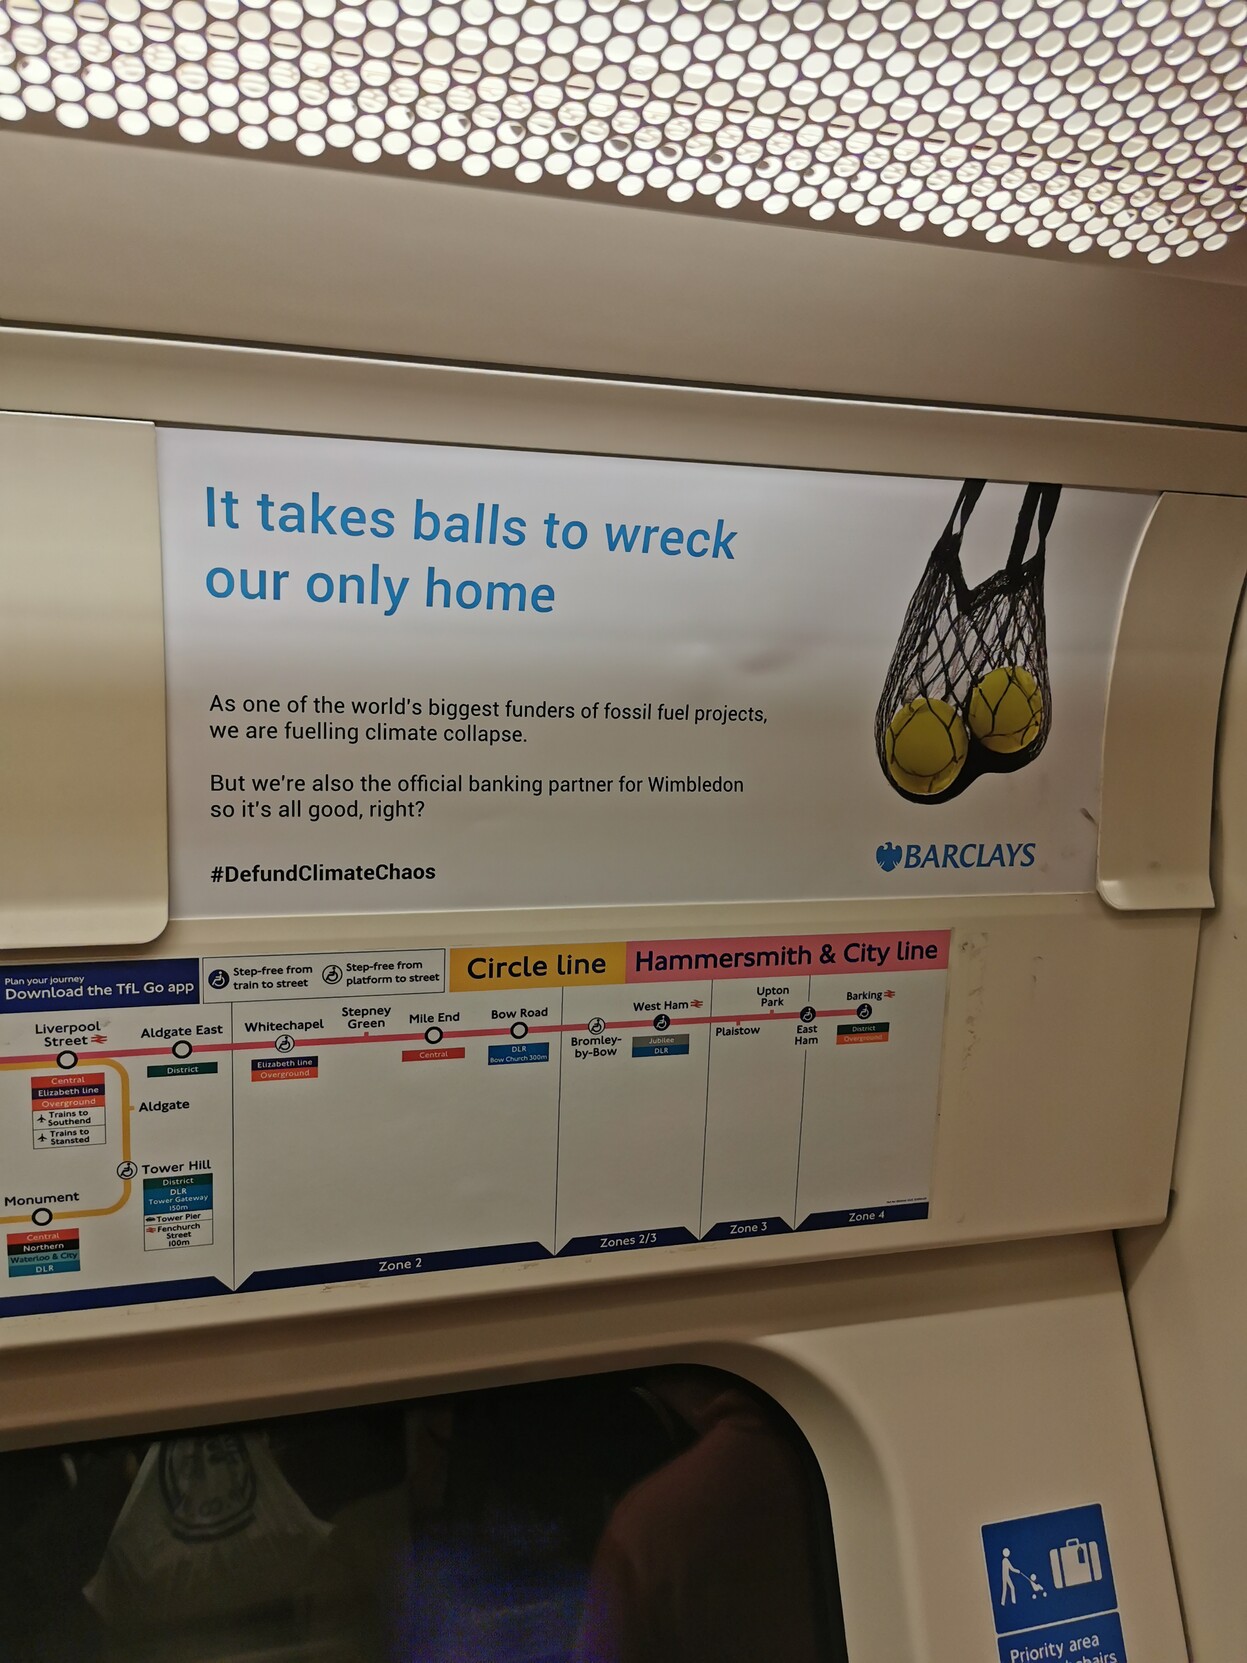 Advert on the London Underground. It says "It takes balls to wreck our only home" followed by "As one of the world's biggest funders of fossil fuels projects, we are fuelling climate collapse" followed by "But we're also the official banking partner for <br />Wimbledon so it's all good, right?" <a class=